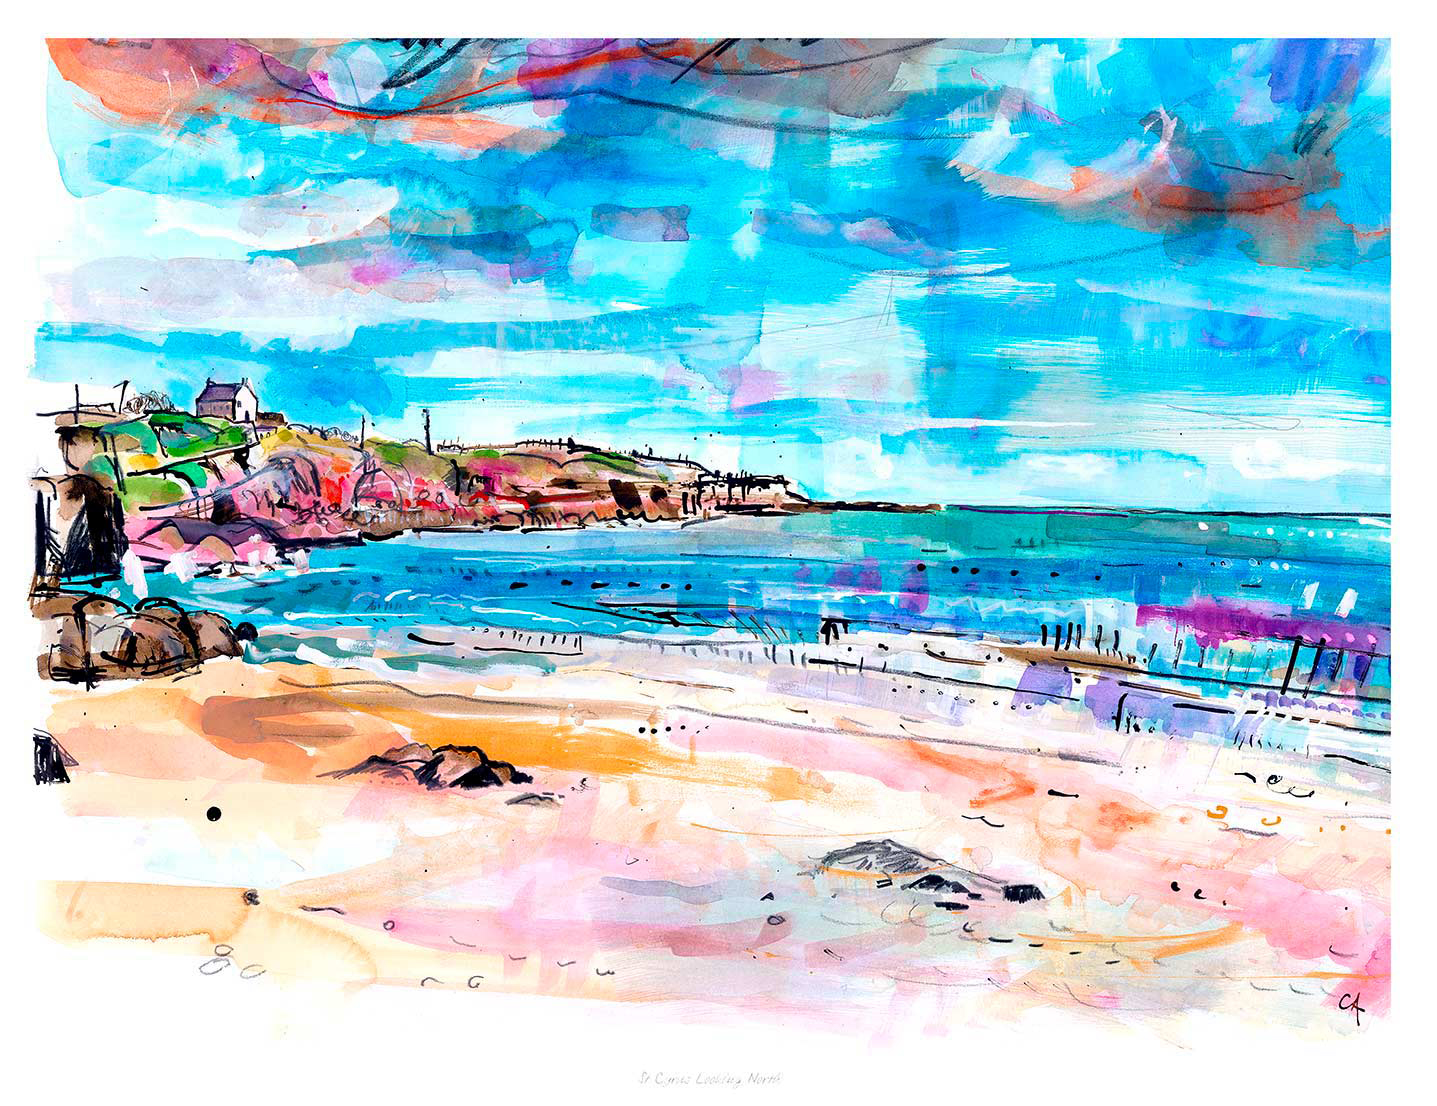 The image depicts a colorful, abstract-style painting of a beach scene with a figure, houses, and vibrant sky. By Claire Arbuthnott